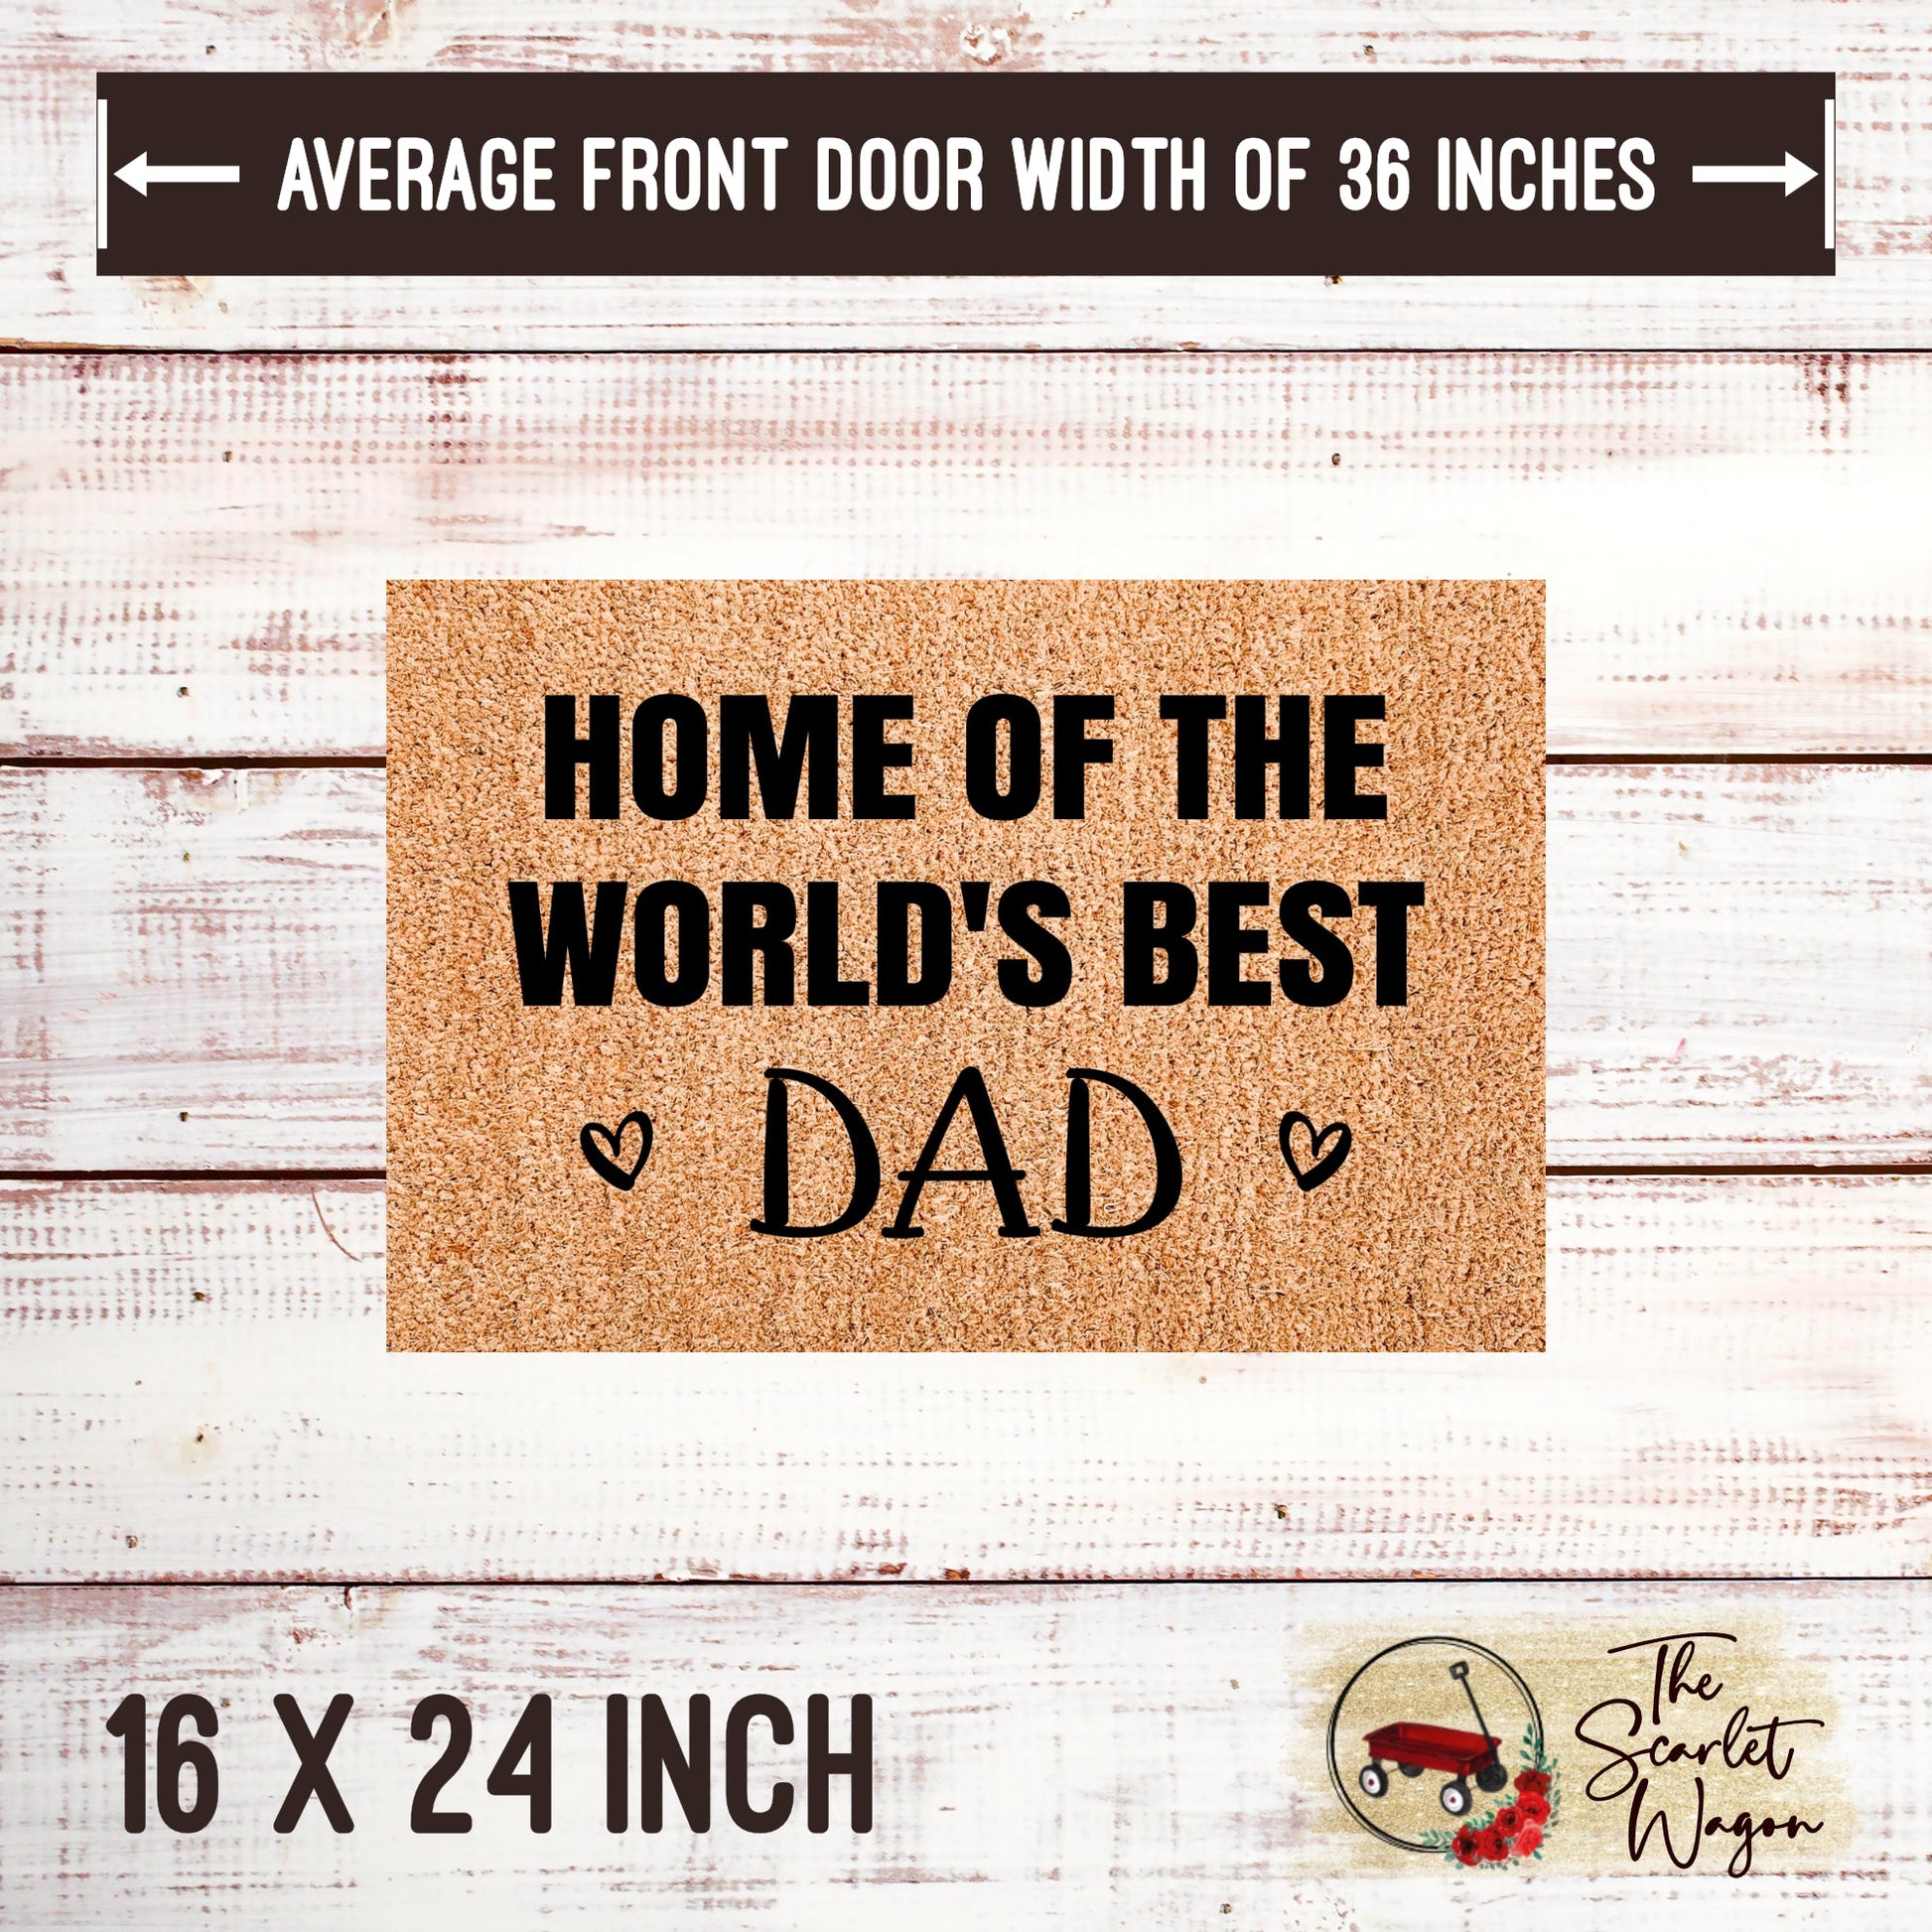 Home of the World's Best Dad Door Mats teelaunch 16x24 Inches (Free Shipping) 